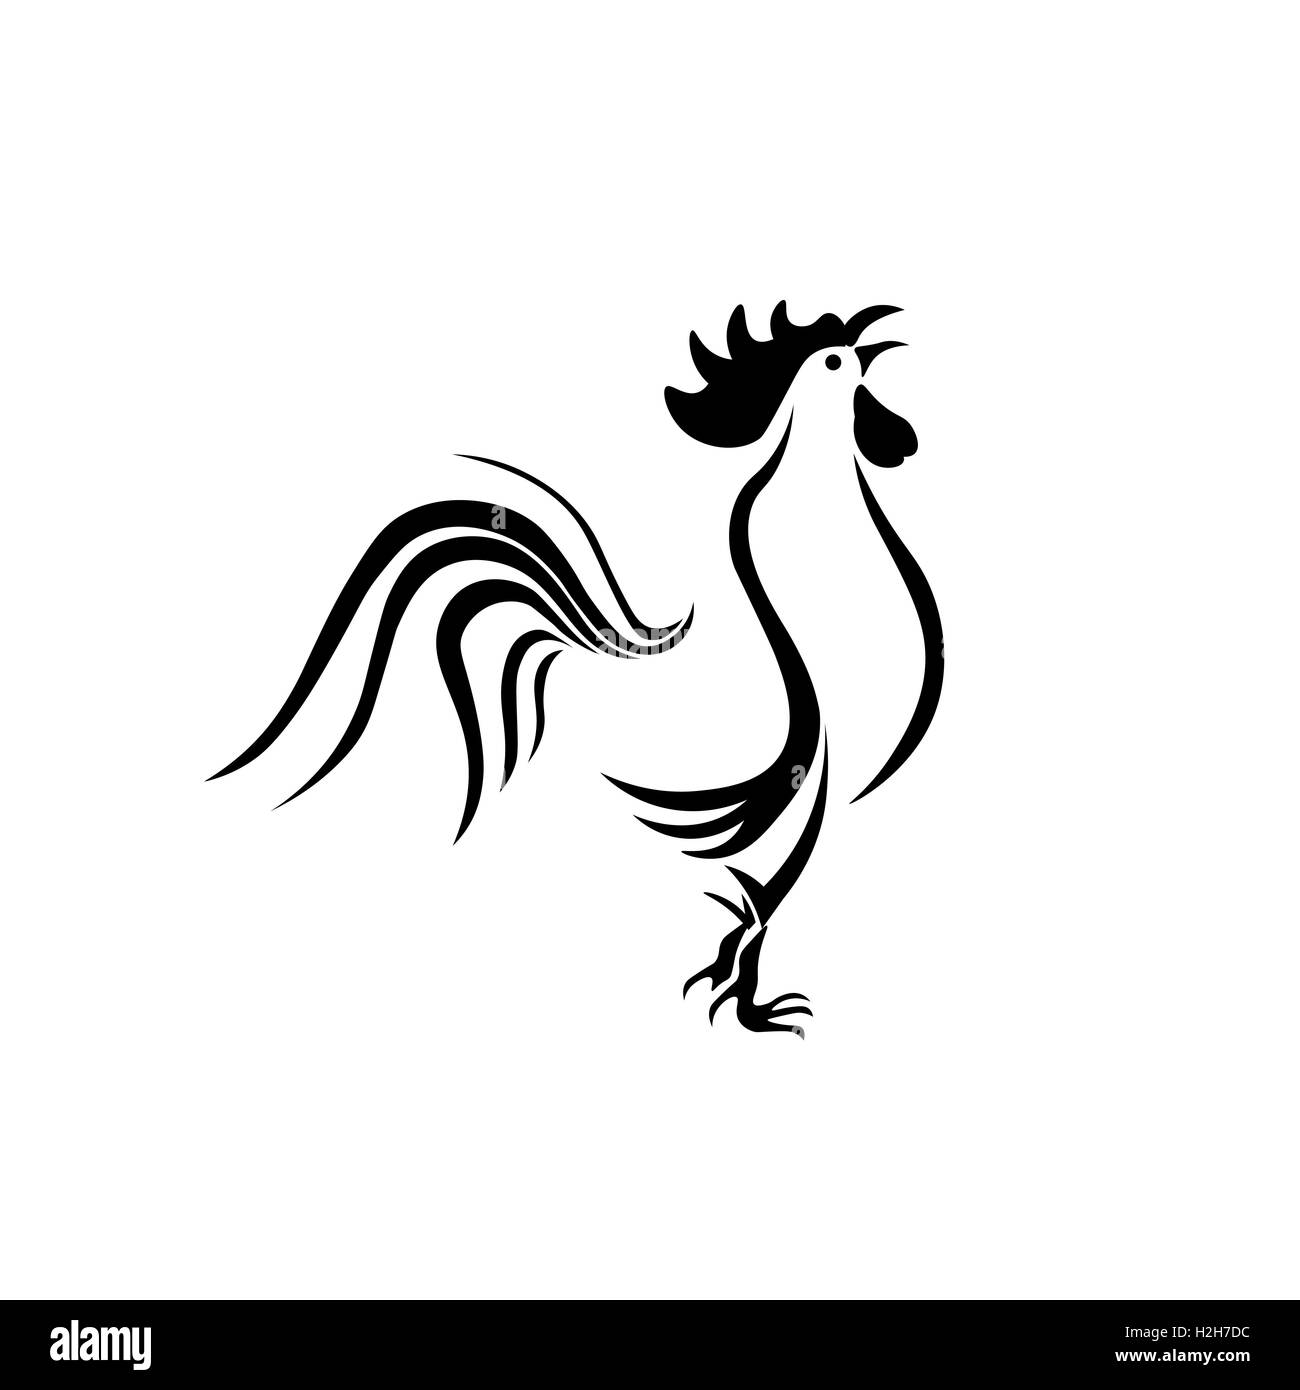 Tattoo Horoscope Rooster Vector Images over 110